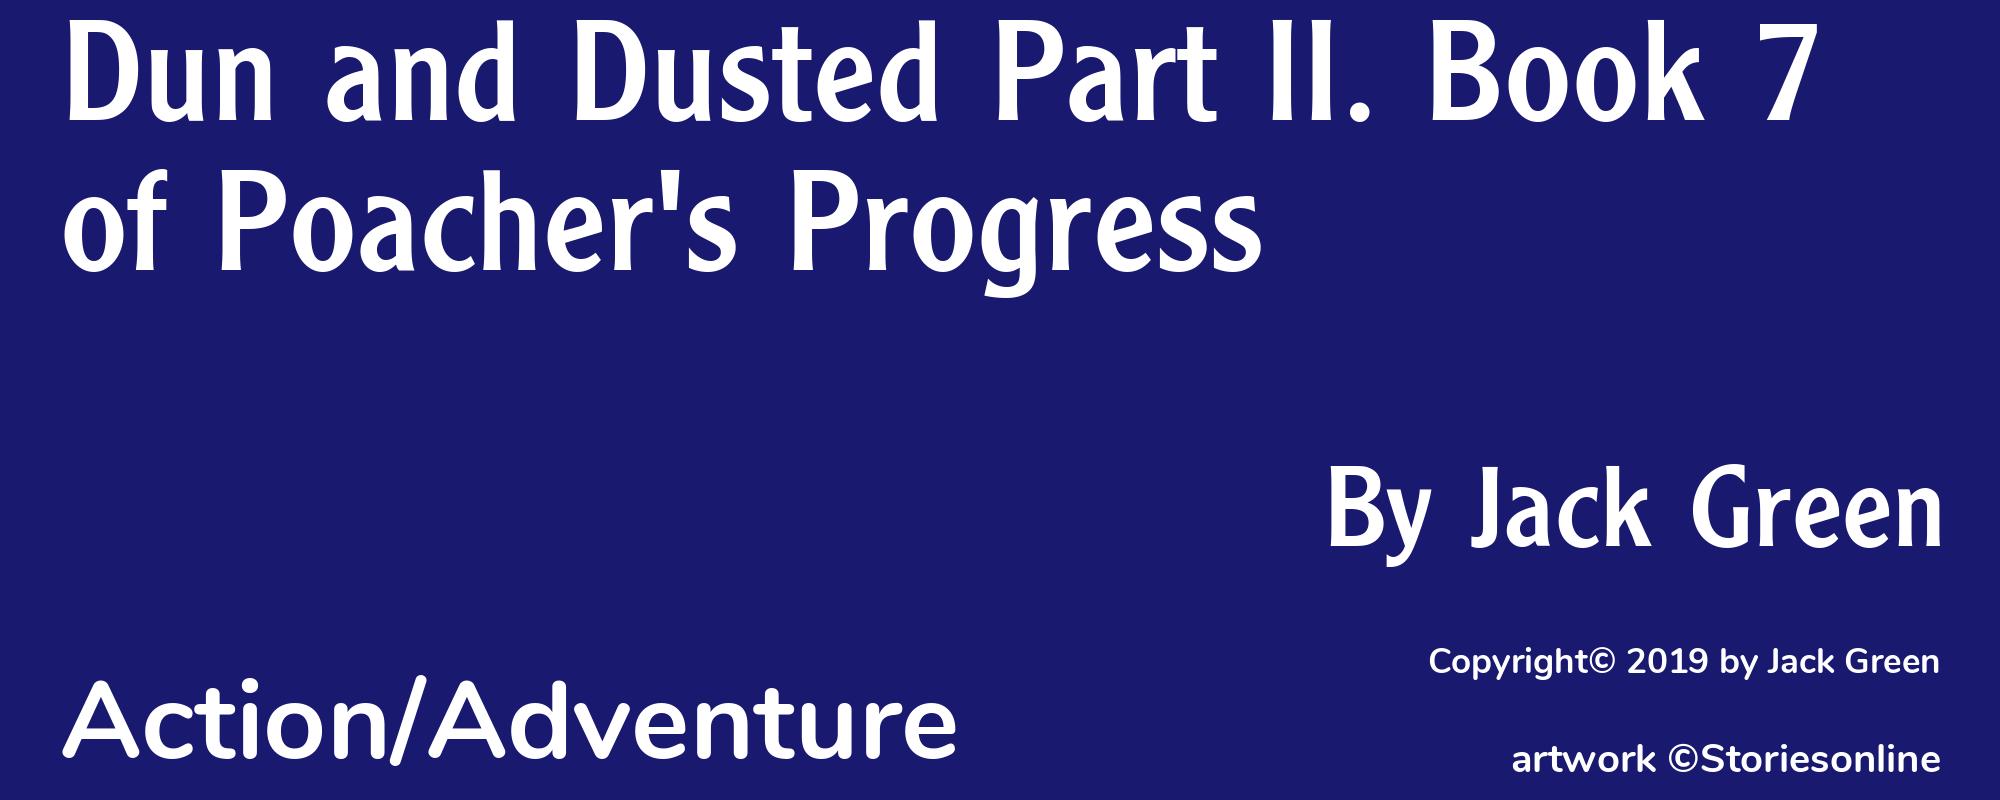 Dun and Dusted Part II. Book 7 of Poacher's Progress - Cover